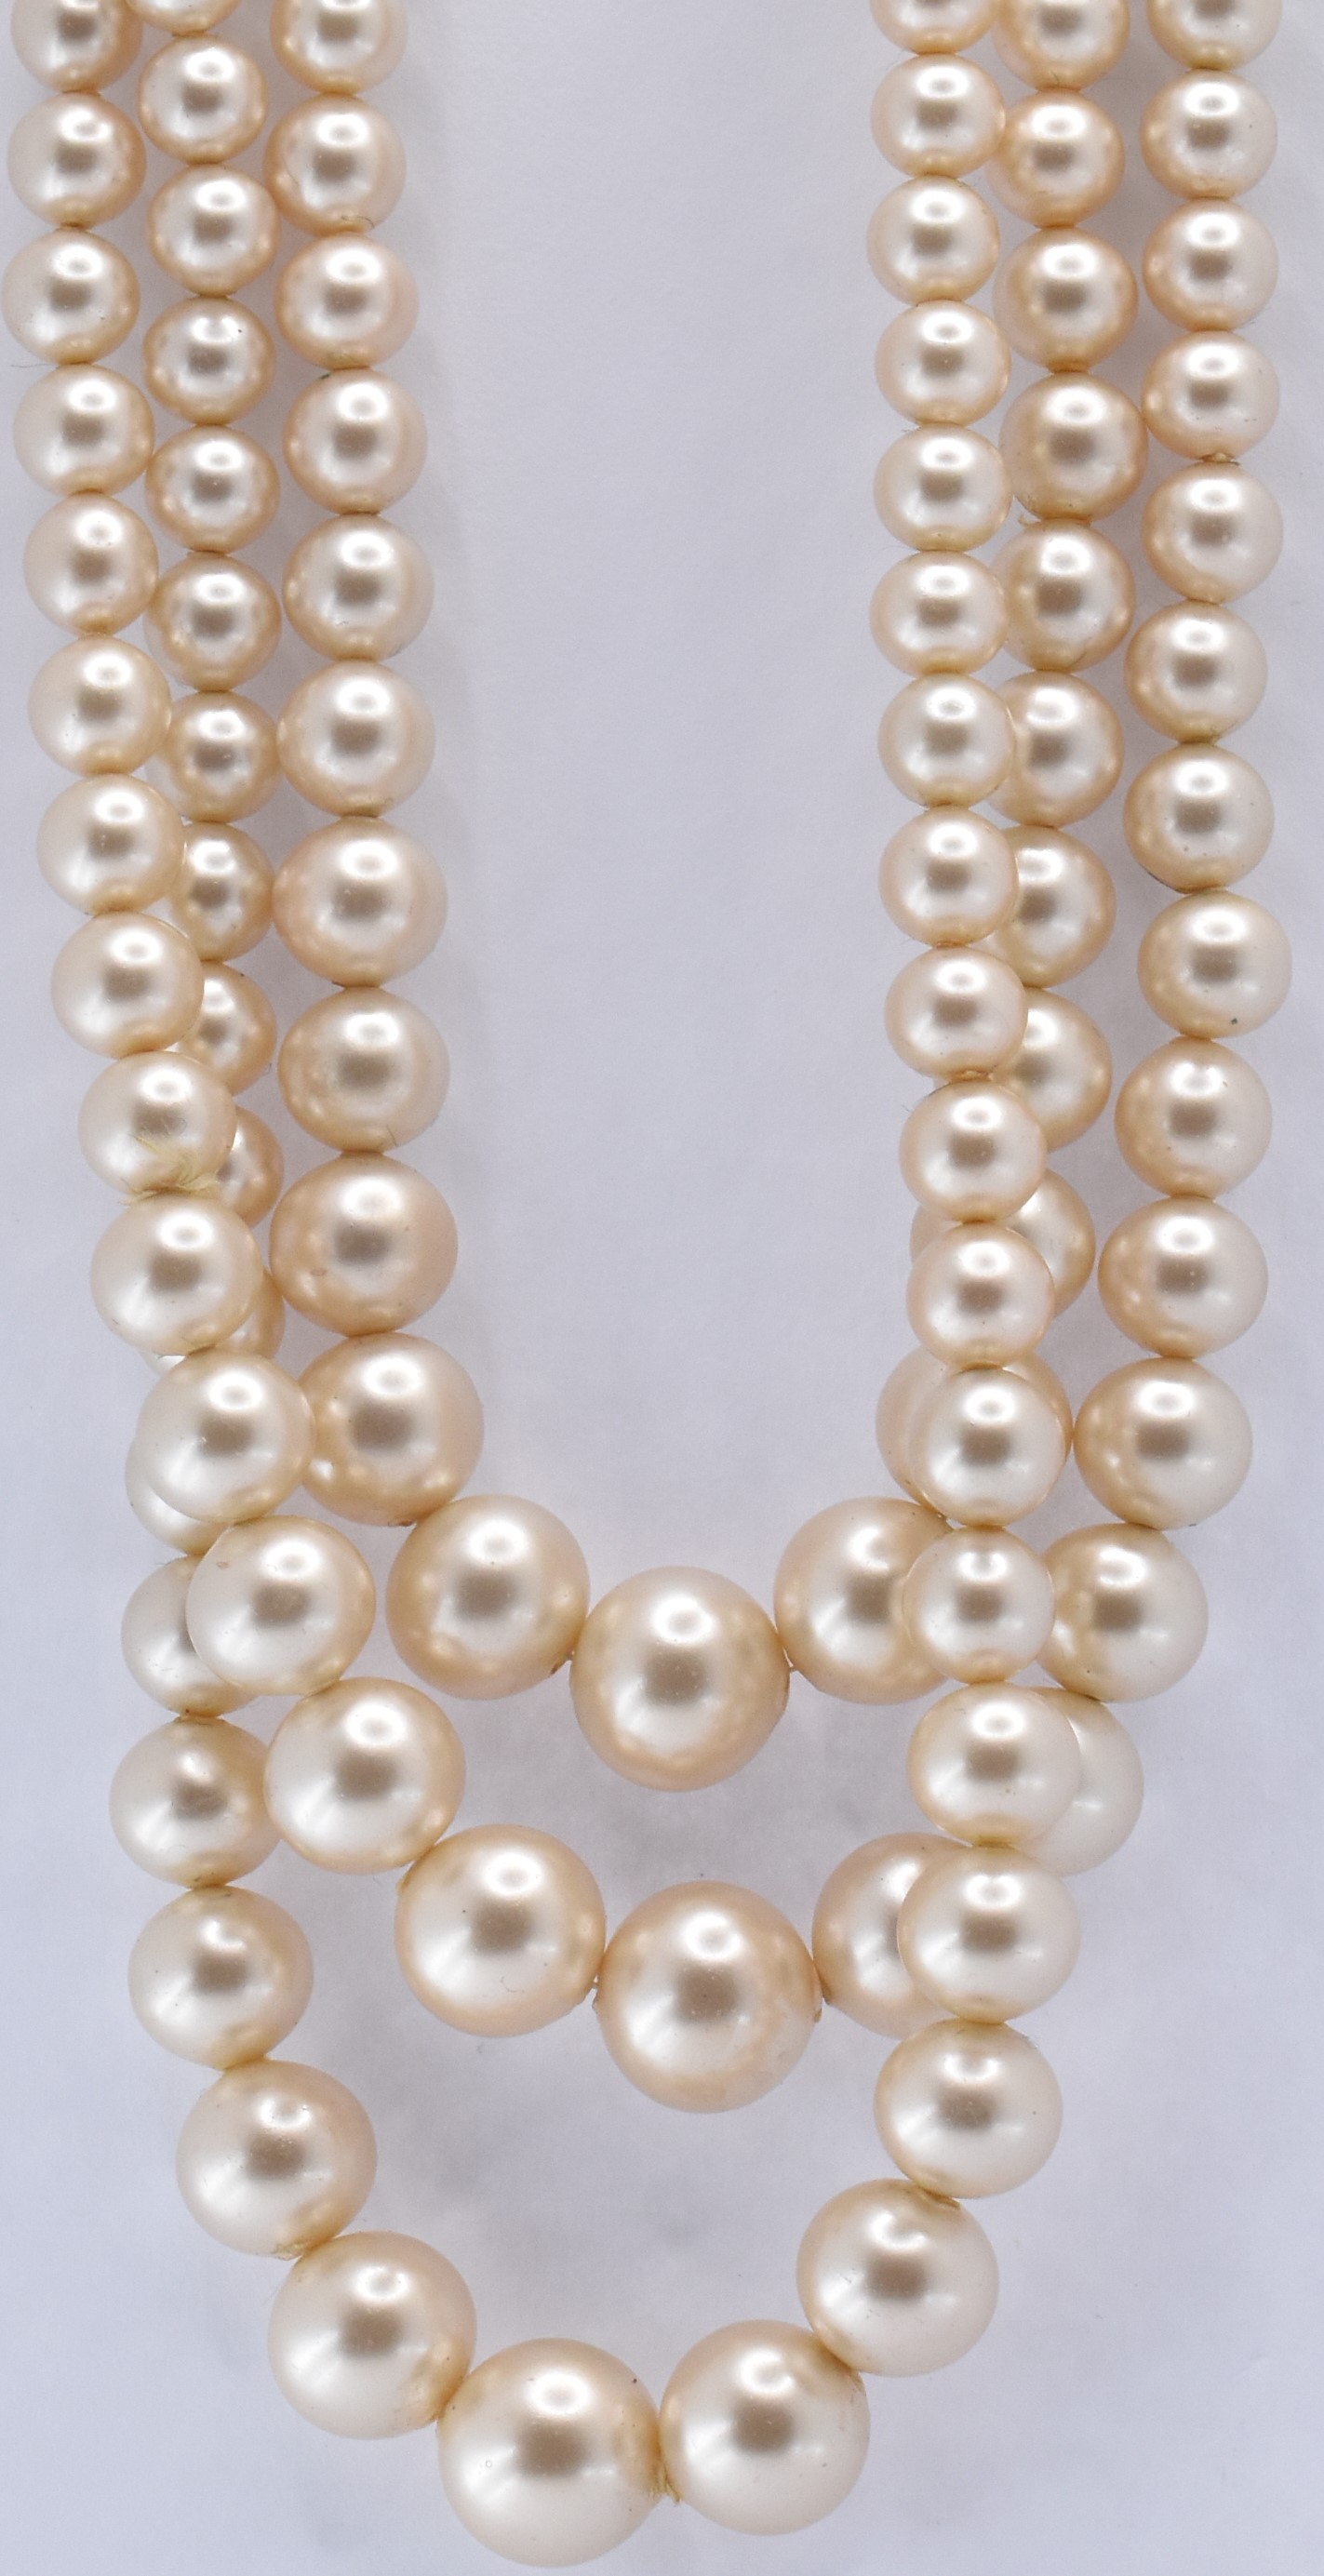 14CT GOLD NECKLACE CHAIN & CIRO PEARL NECKLACE - Image 2 of 8